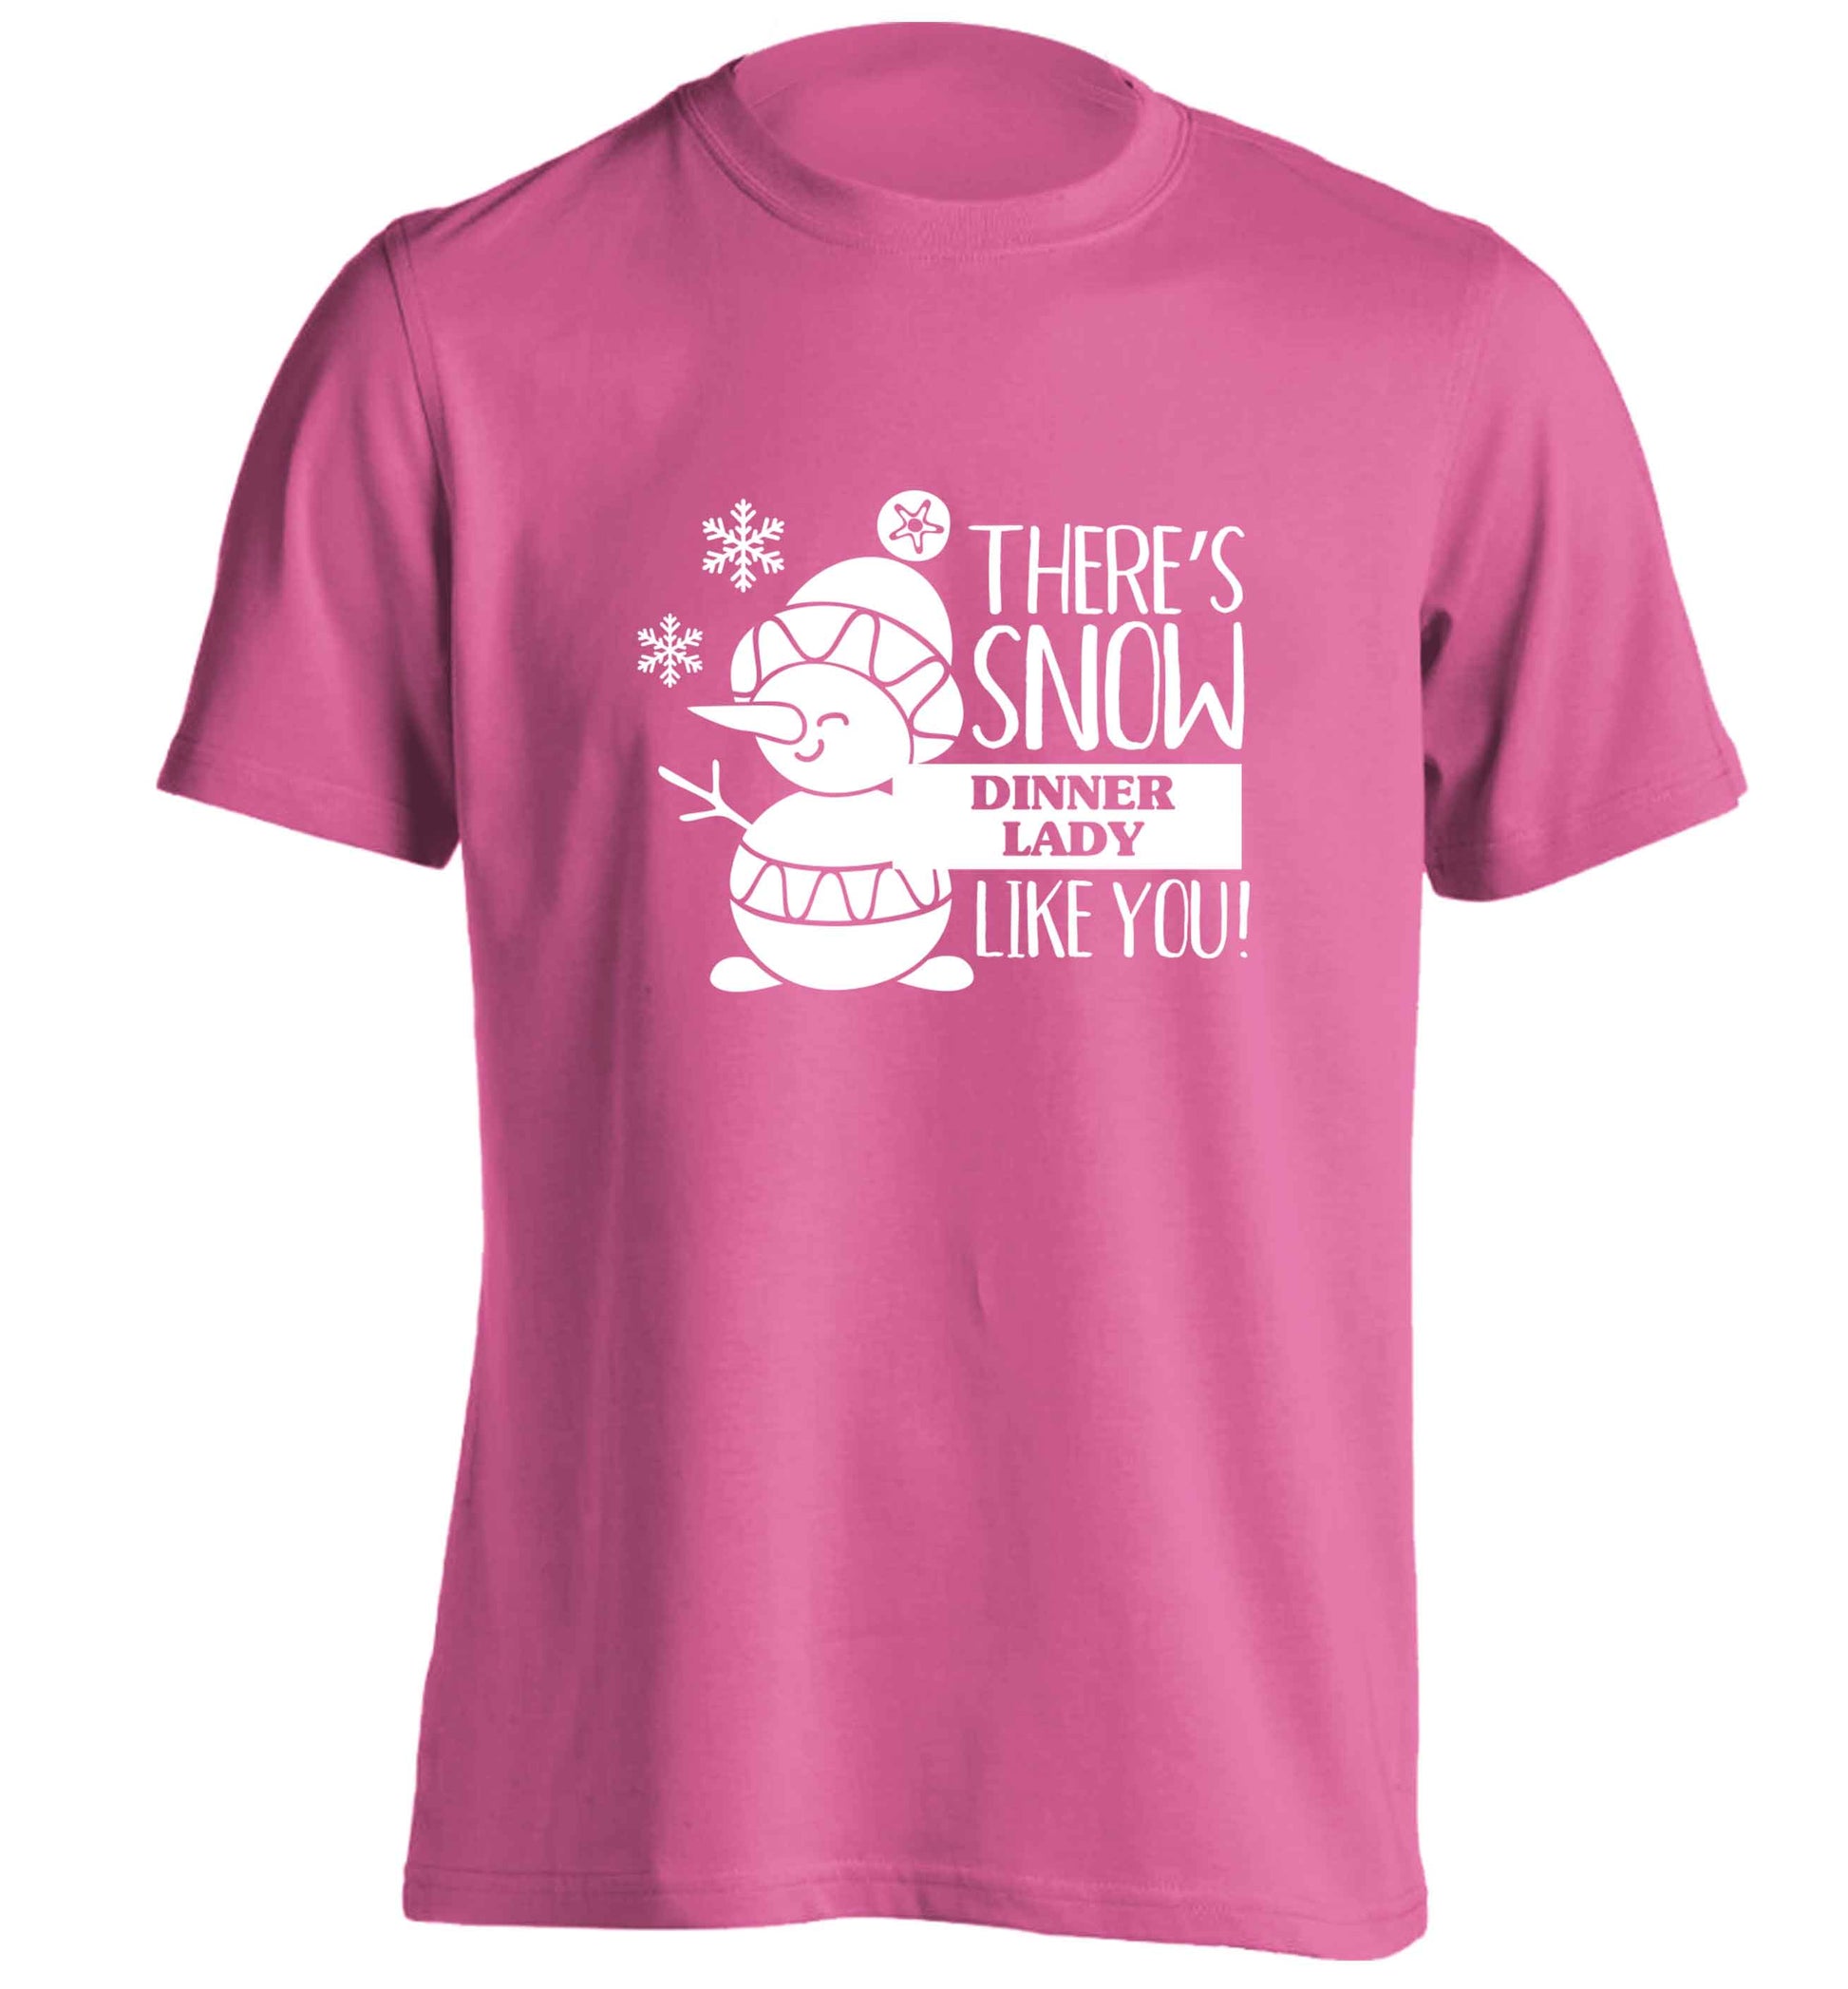 There's snow dinner lady like you adults unisex pink Tshirt 2XL